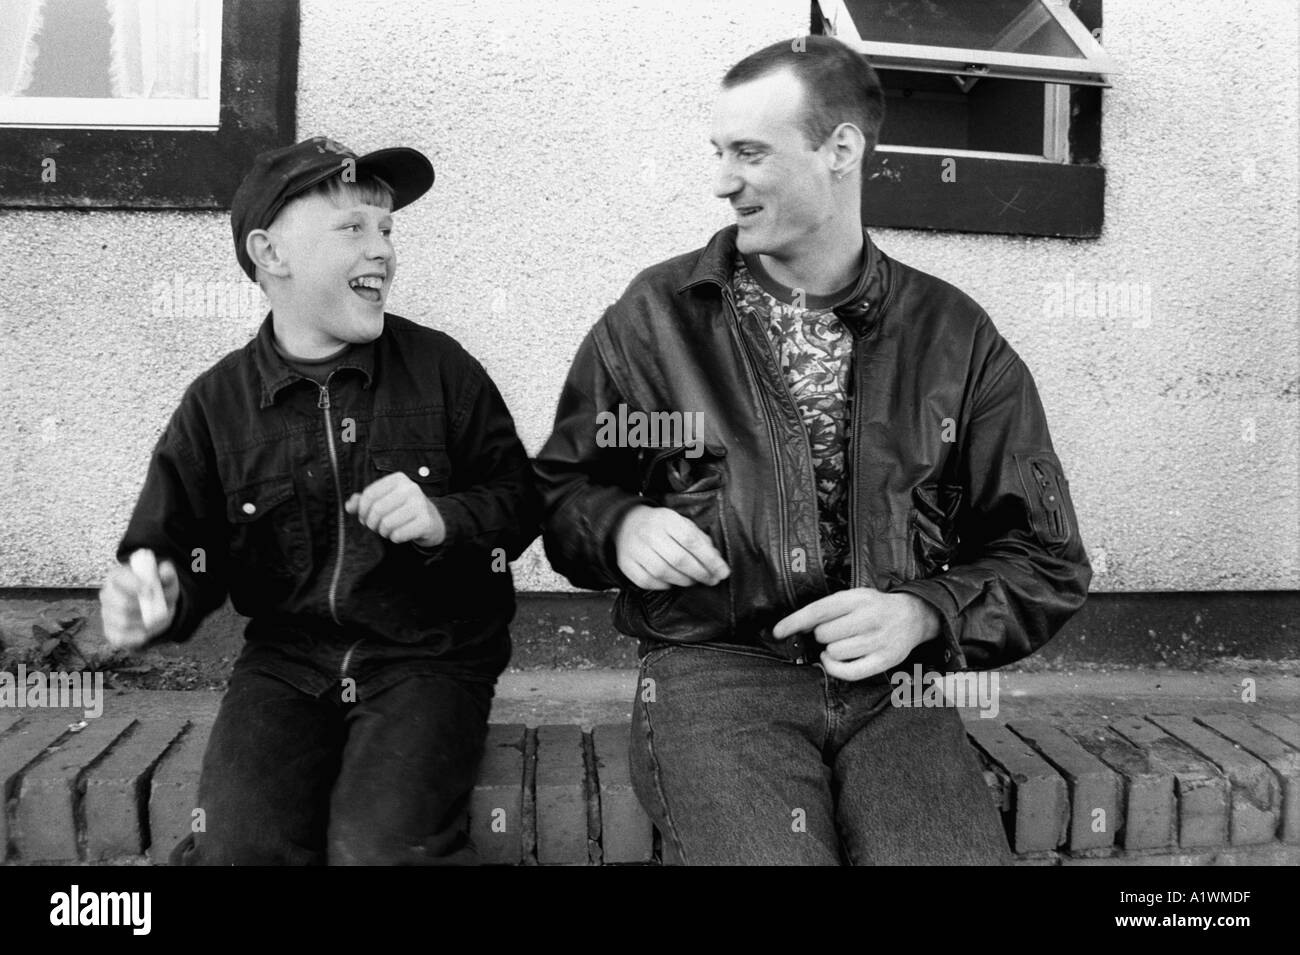 Tony left with his befriender Michael in Possilpark an area with many social problems. Stock Photo